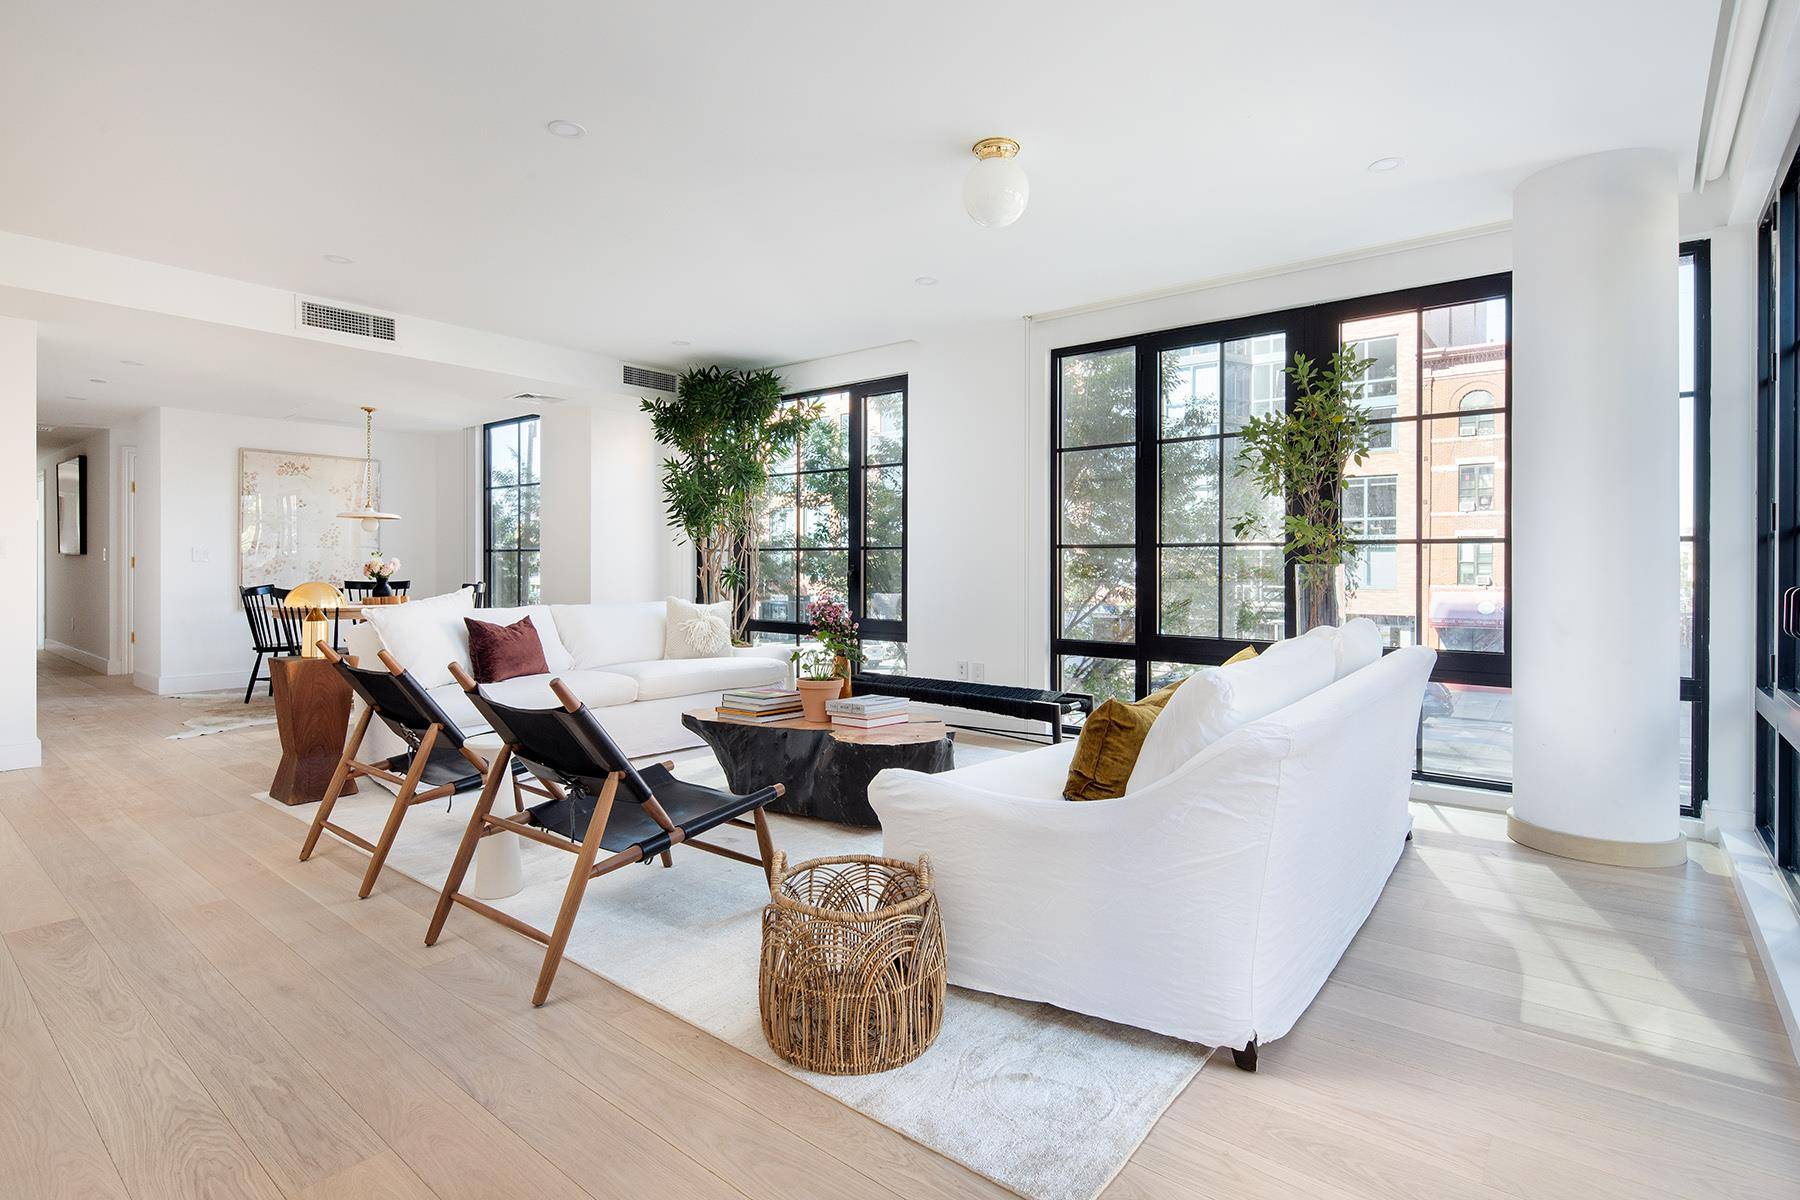 Beautifully crafted by the revered Brooklyn Home Company, this exciting new construction three bedroom, two and a half bathroom residence features designer interiors, private outdoor space and a perfect location ...